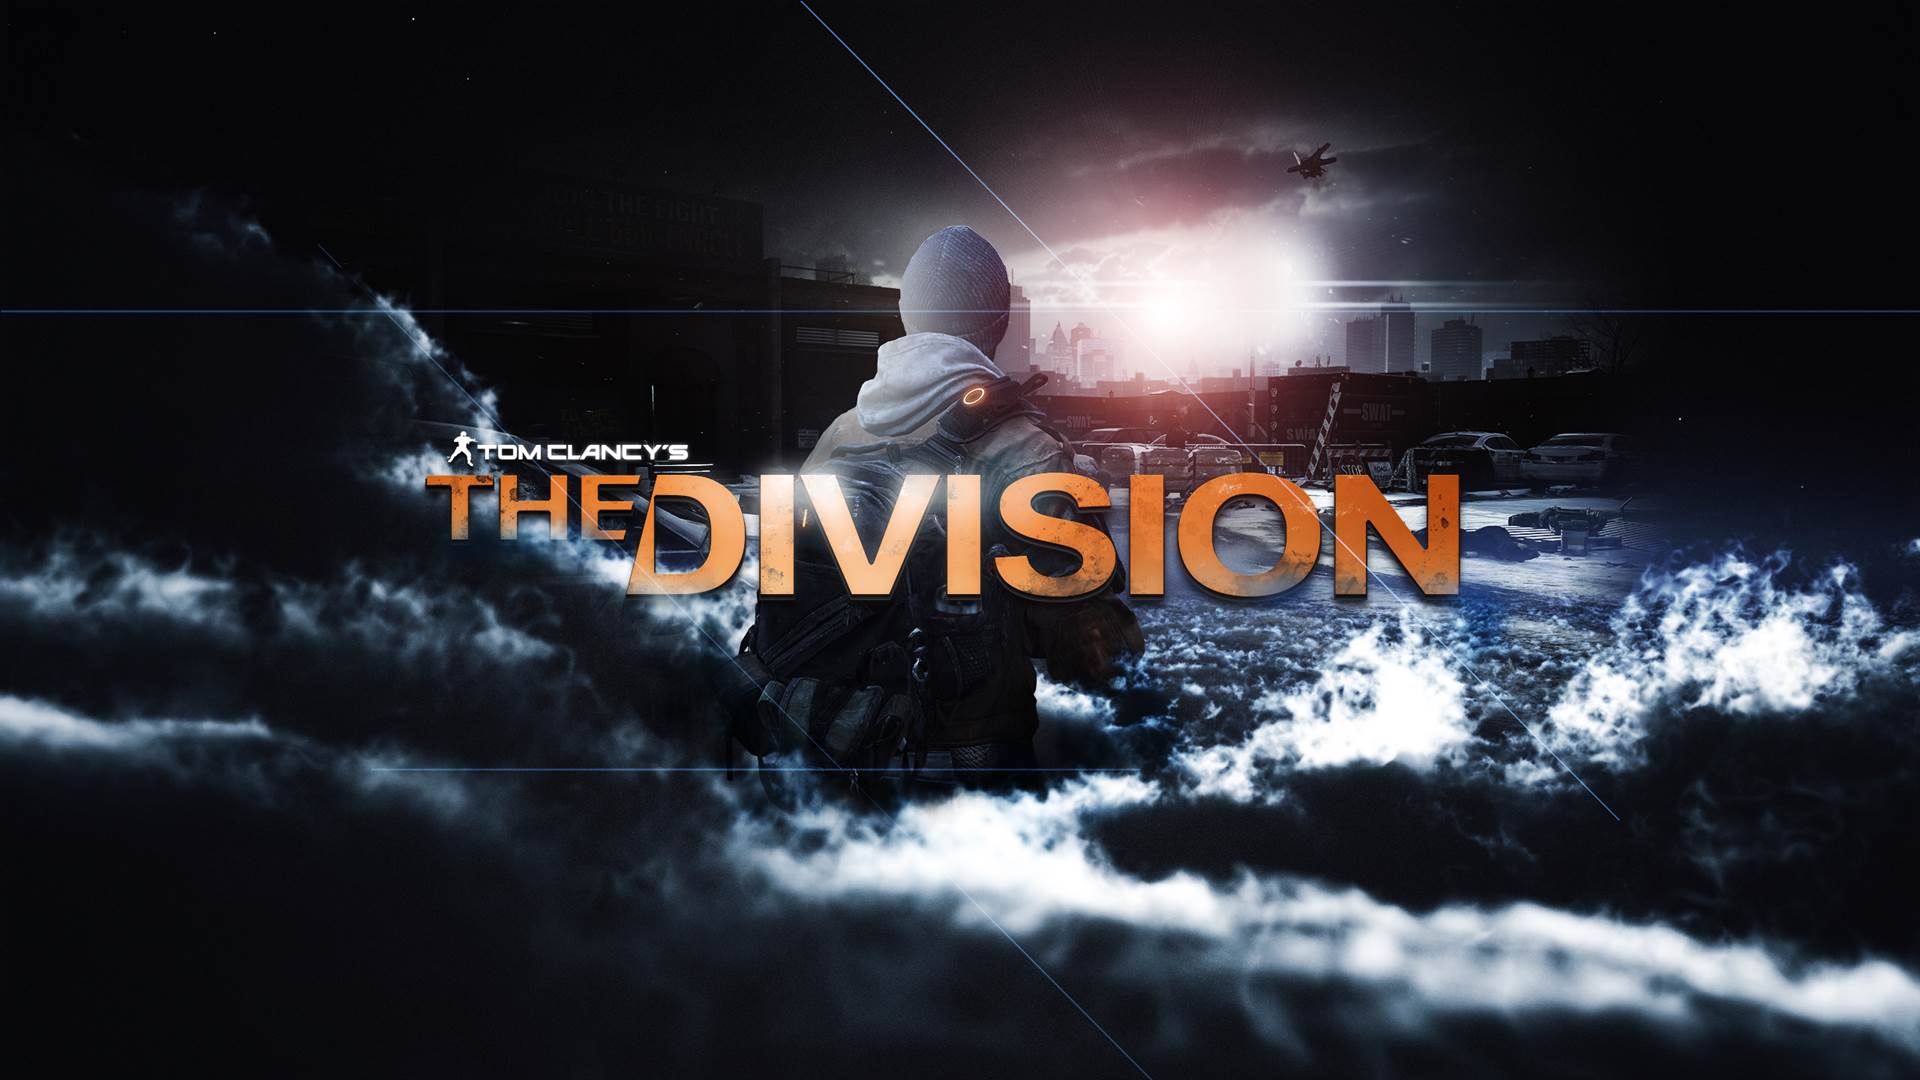 Tom clancys the division wallpapers in p hd